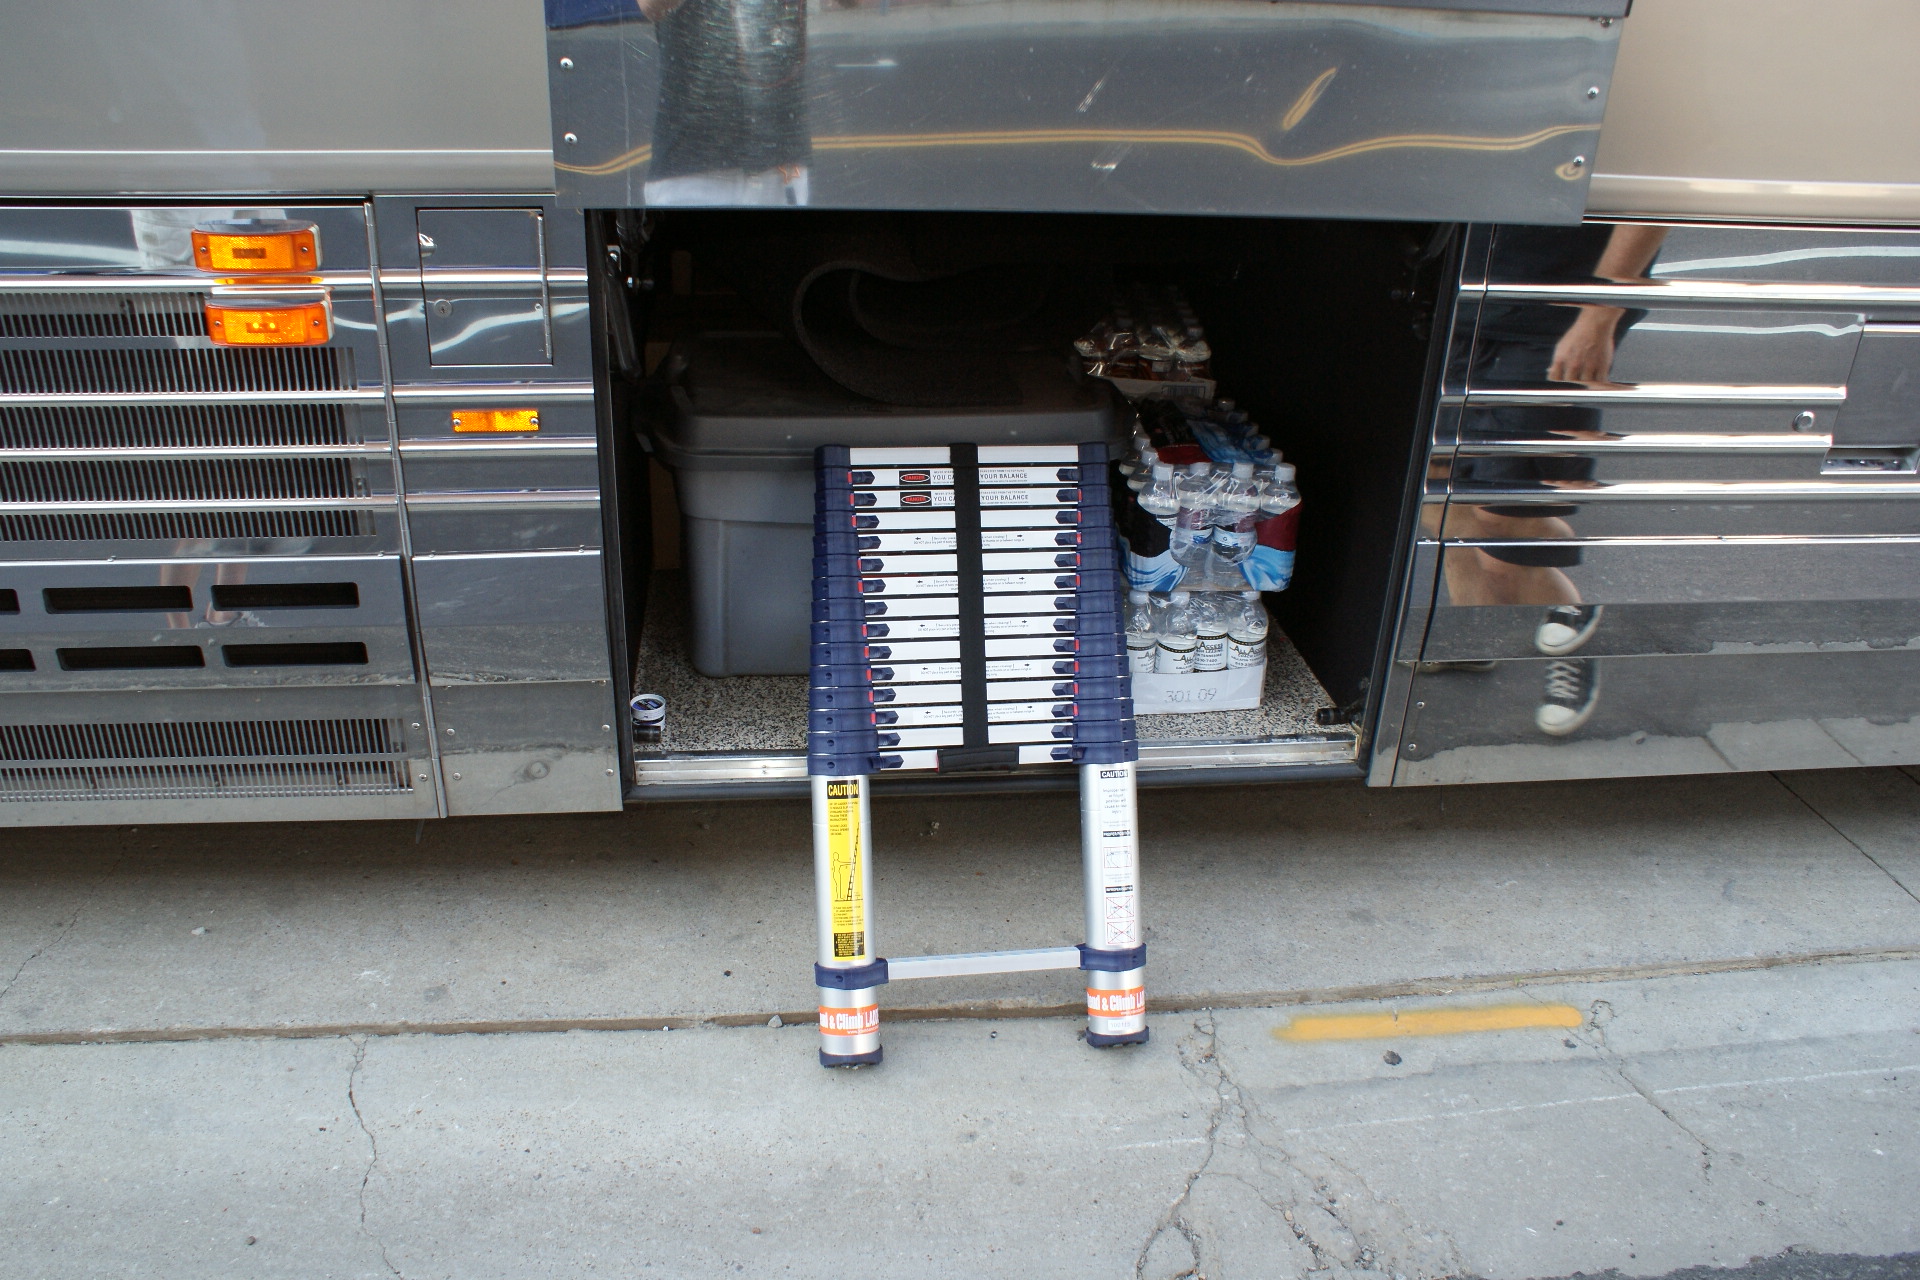 Telescoping ladders easily store in the baggage compartments of this tour bus.